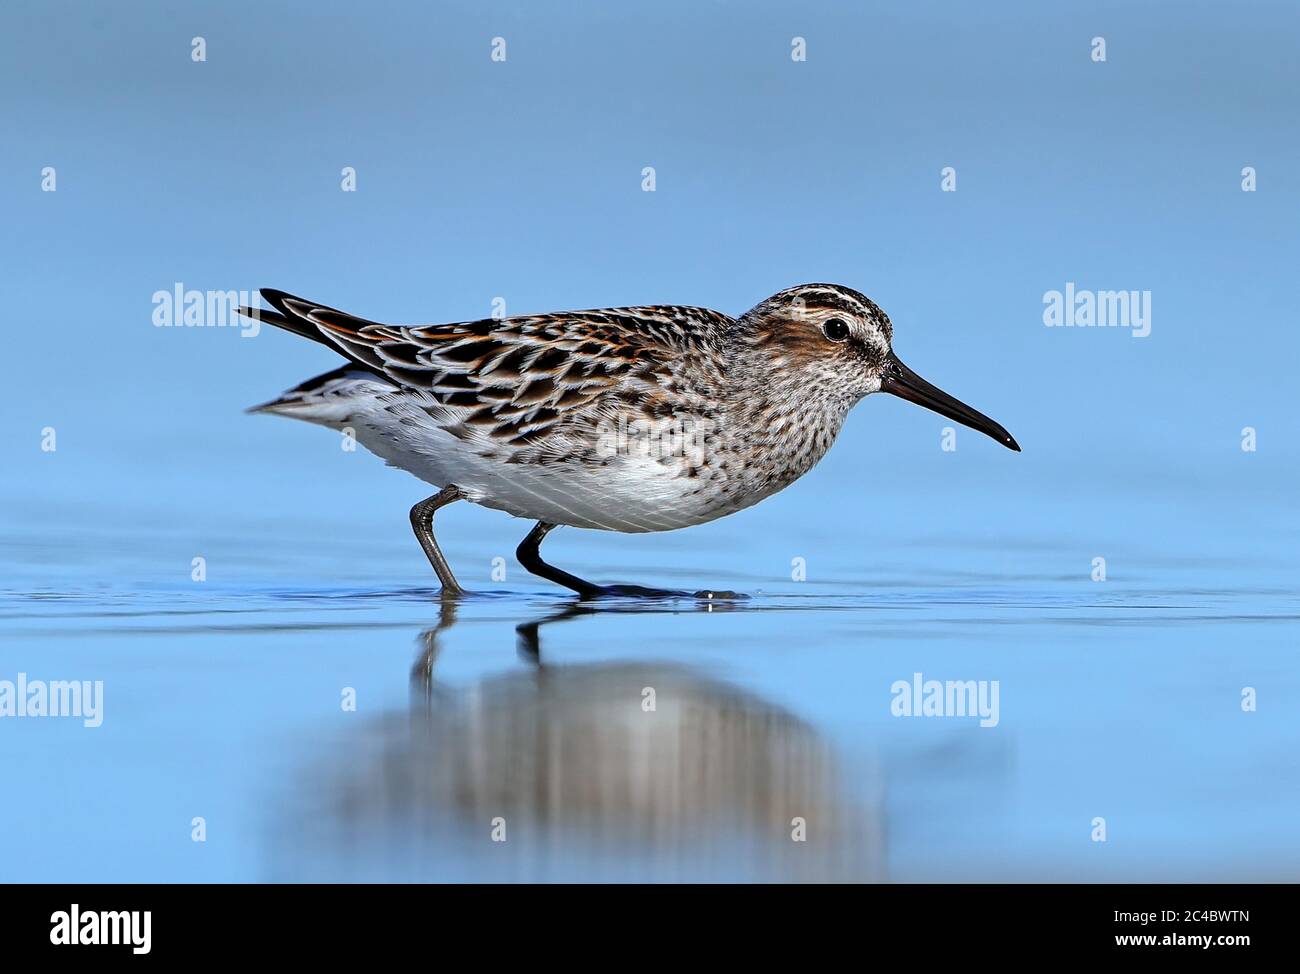 broad-billed sandpiper (Calidris falcinellus, Limicola falcinellus), foraging in shallow water, side view, France, Hyeres Stock Photo